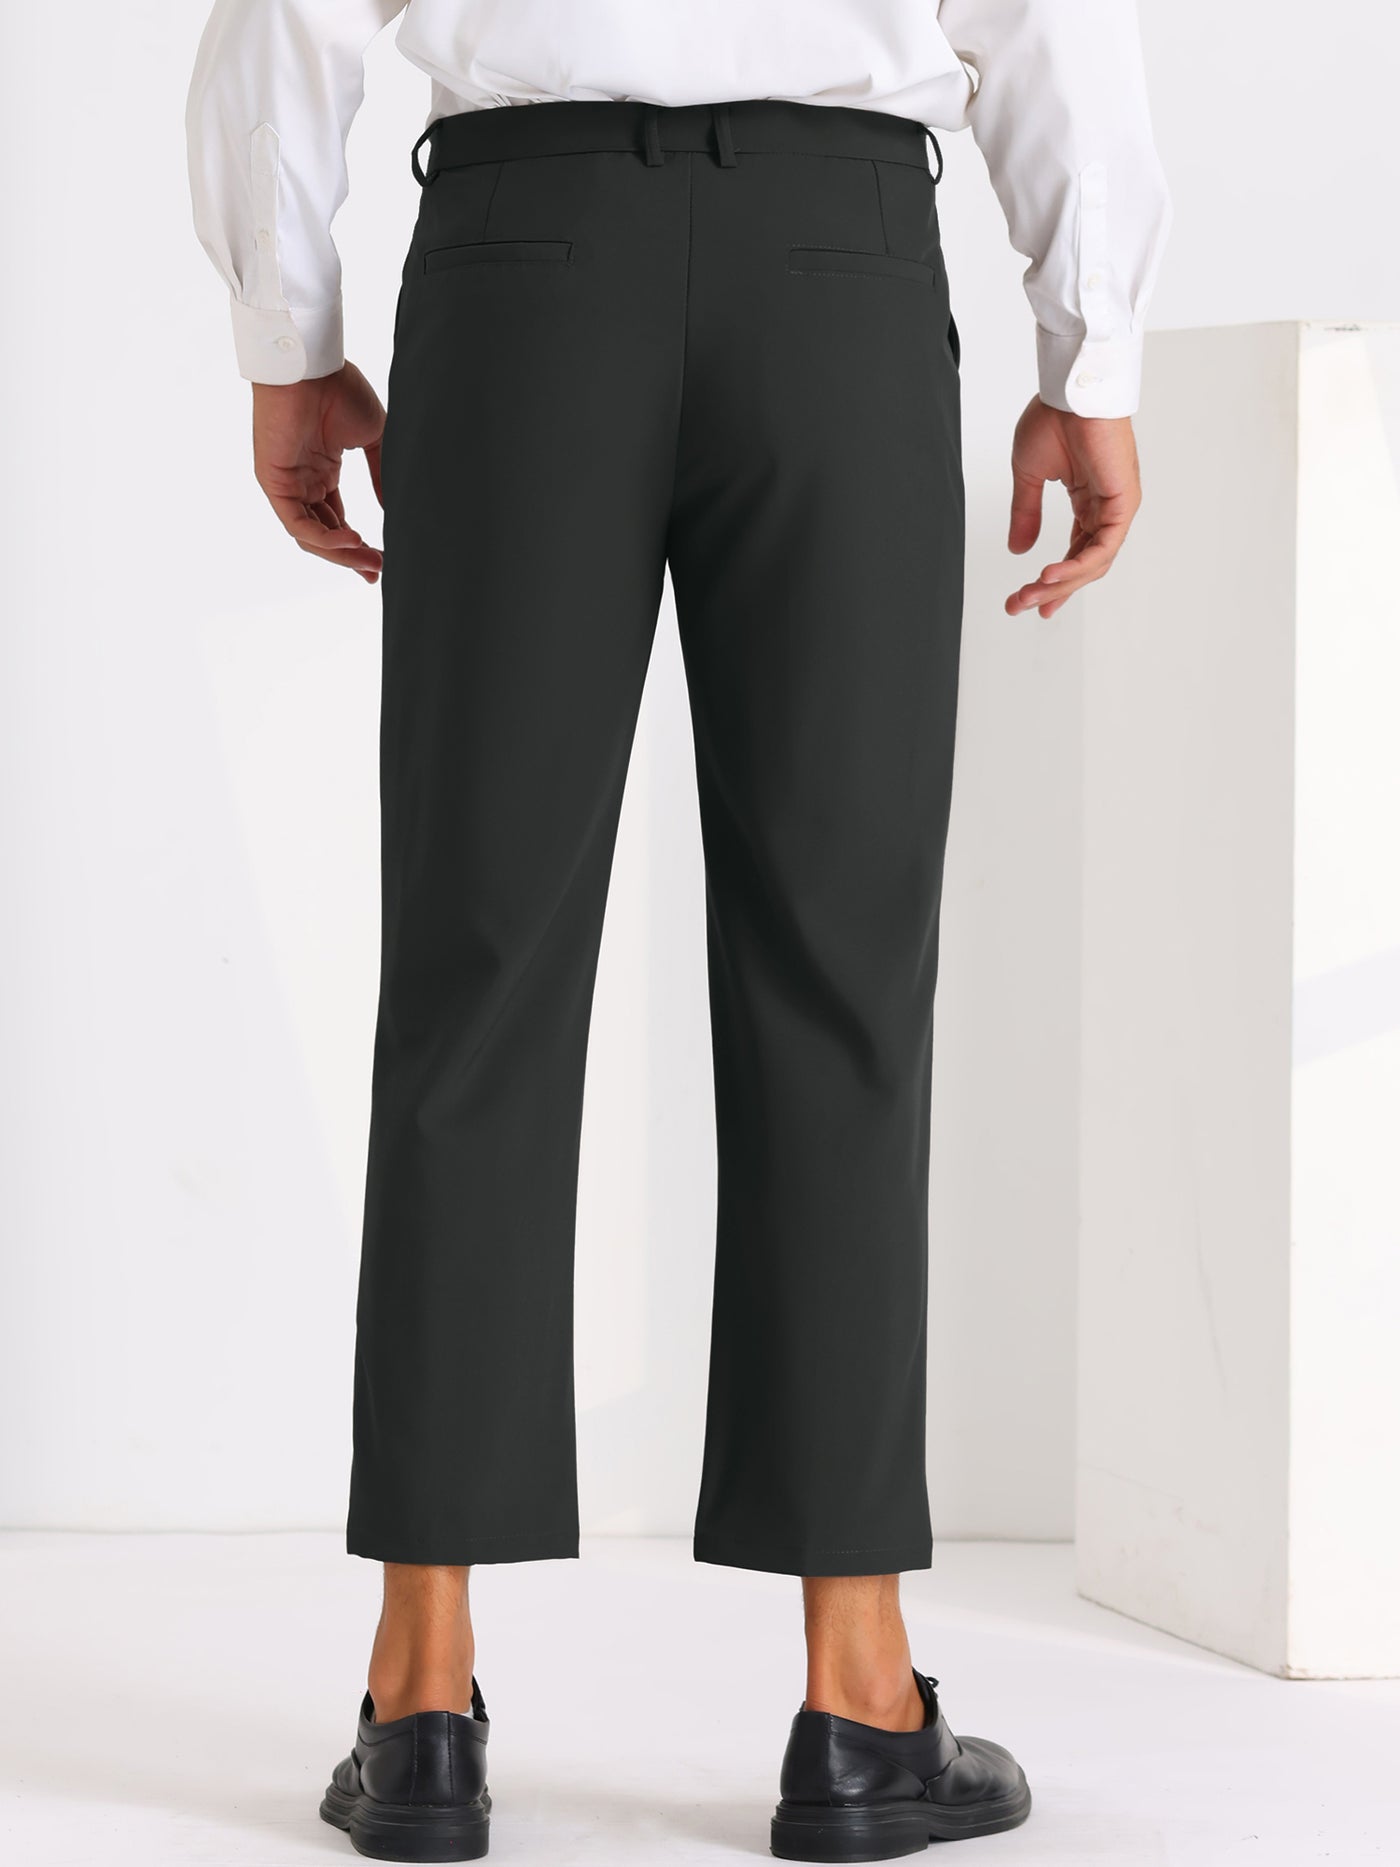 Bublédon Men's Two Buttons Pleated Front Tapered Work Office Dress Pants